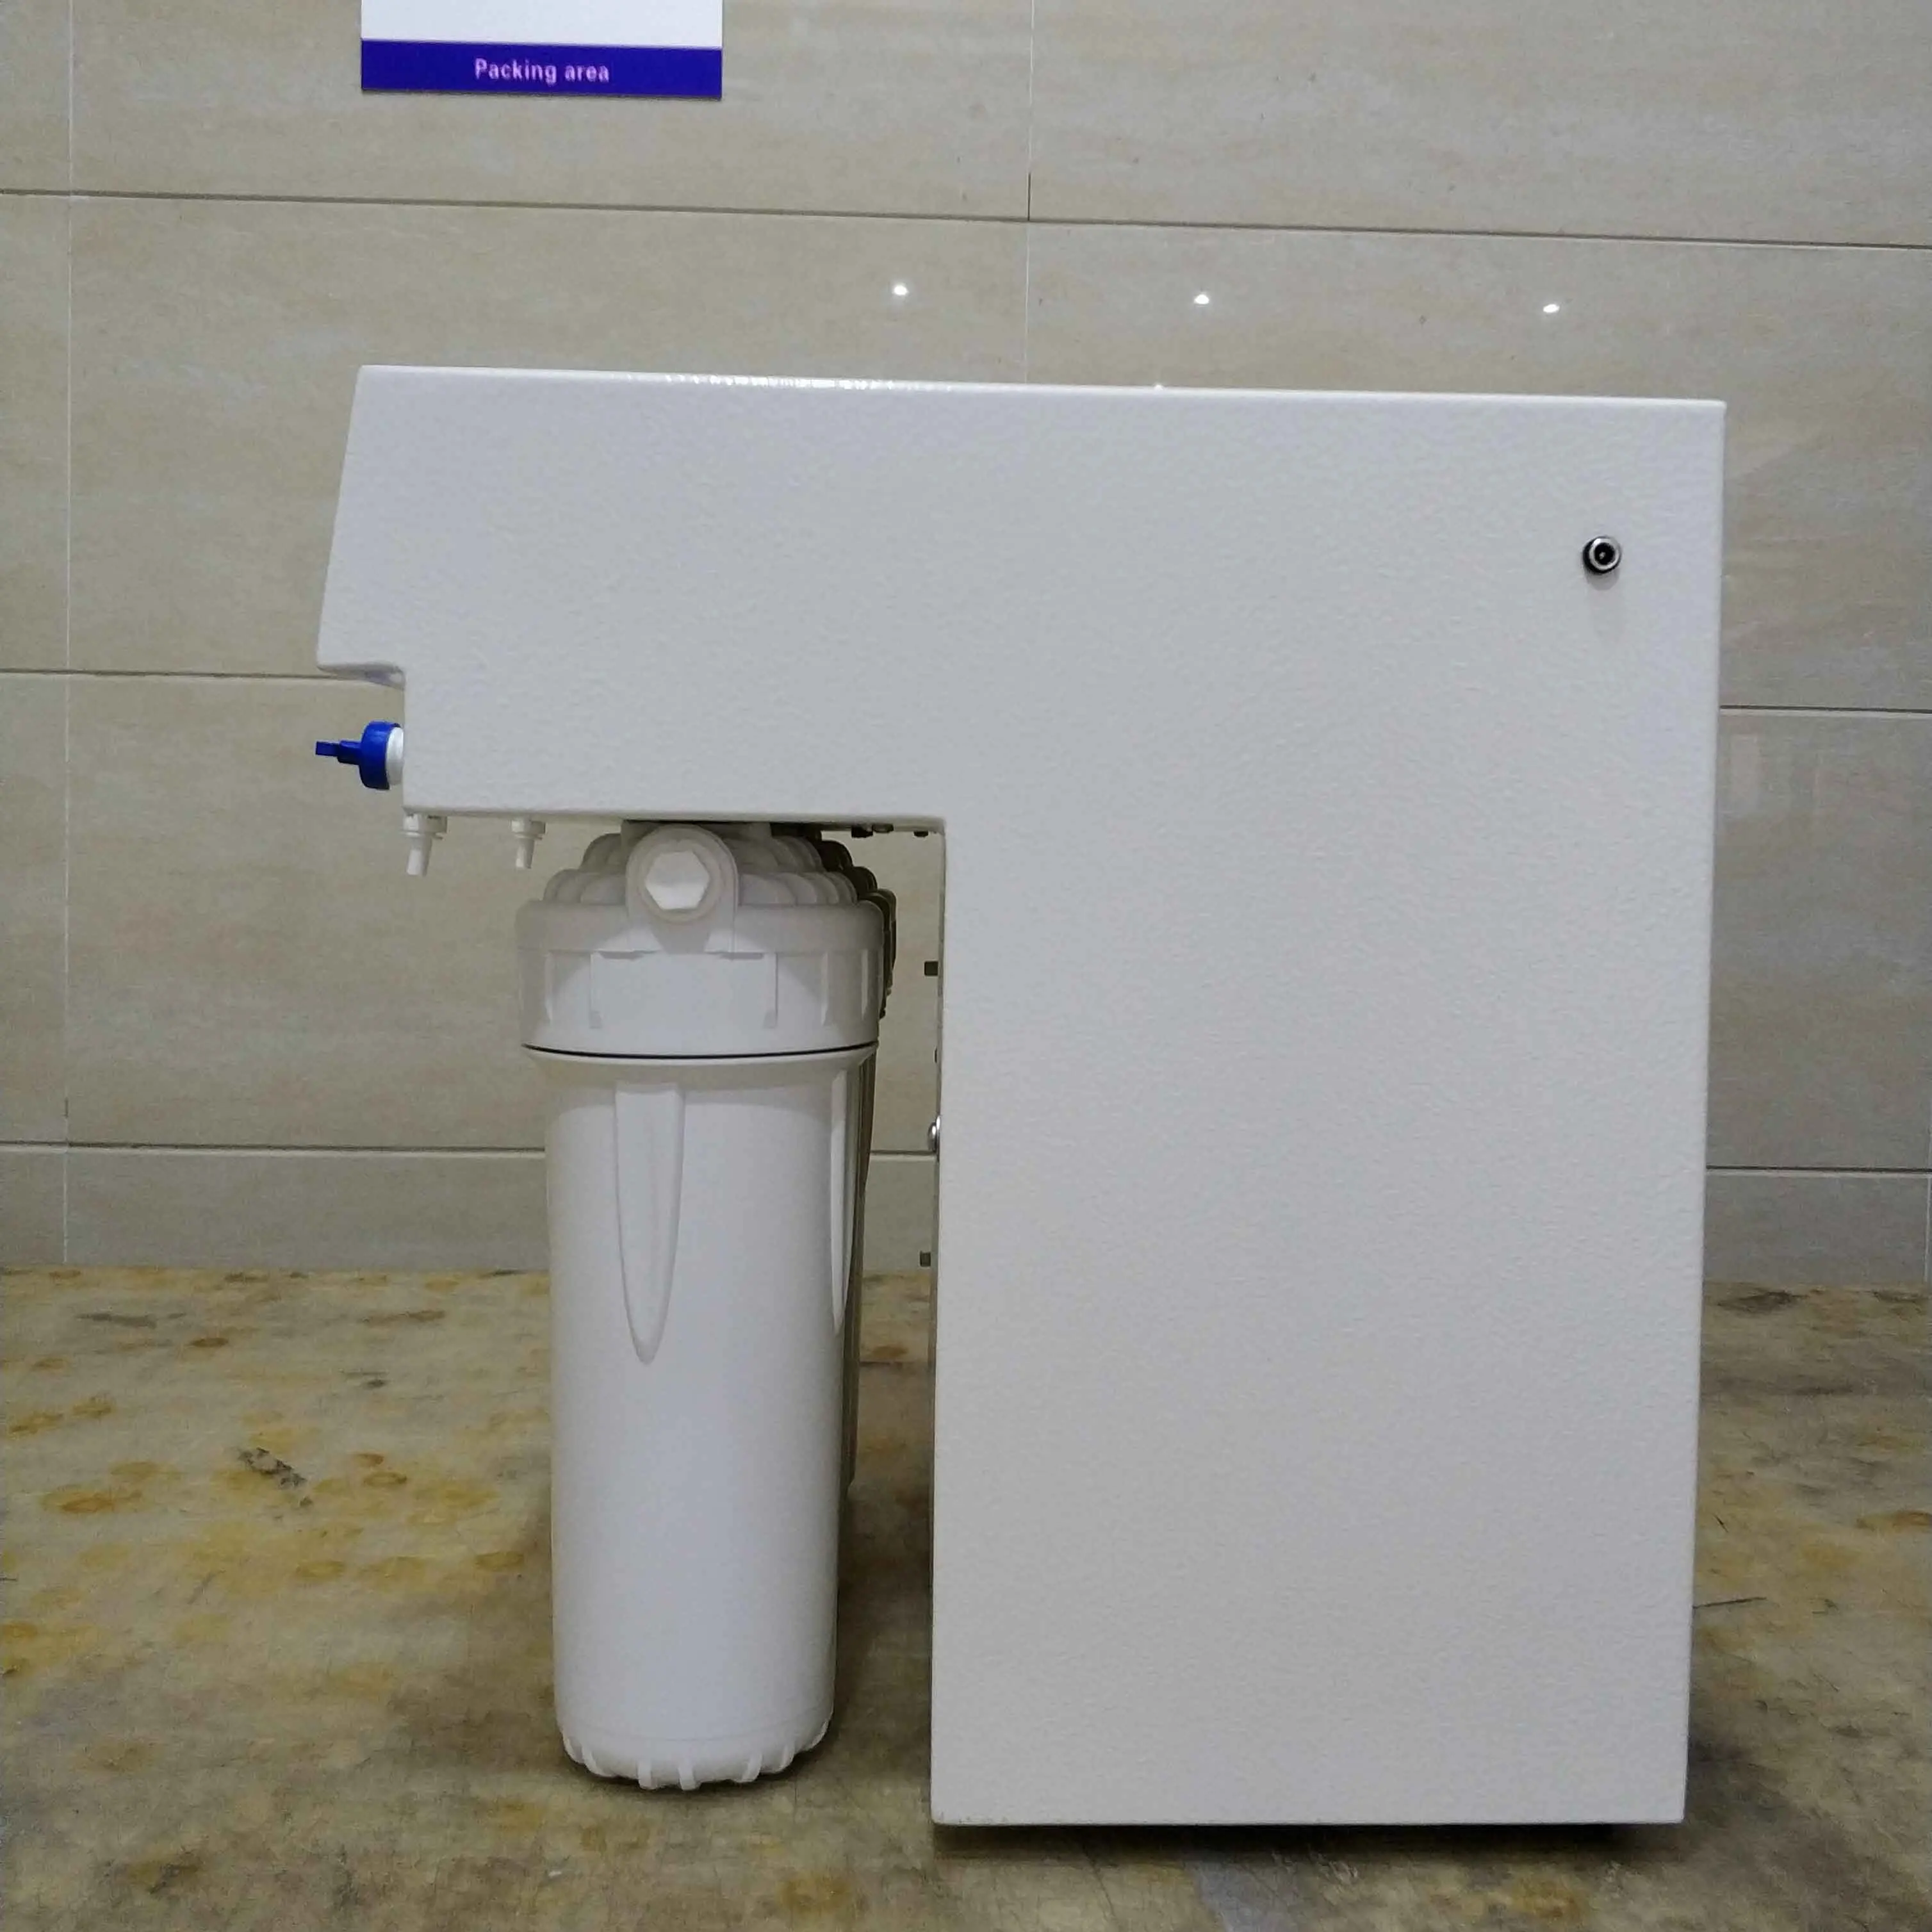 Basic-Q15 Cheap Water Purifier Portable Water Purification System